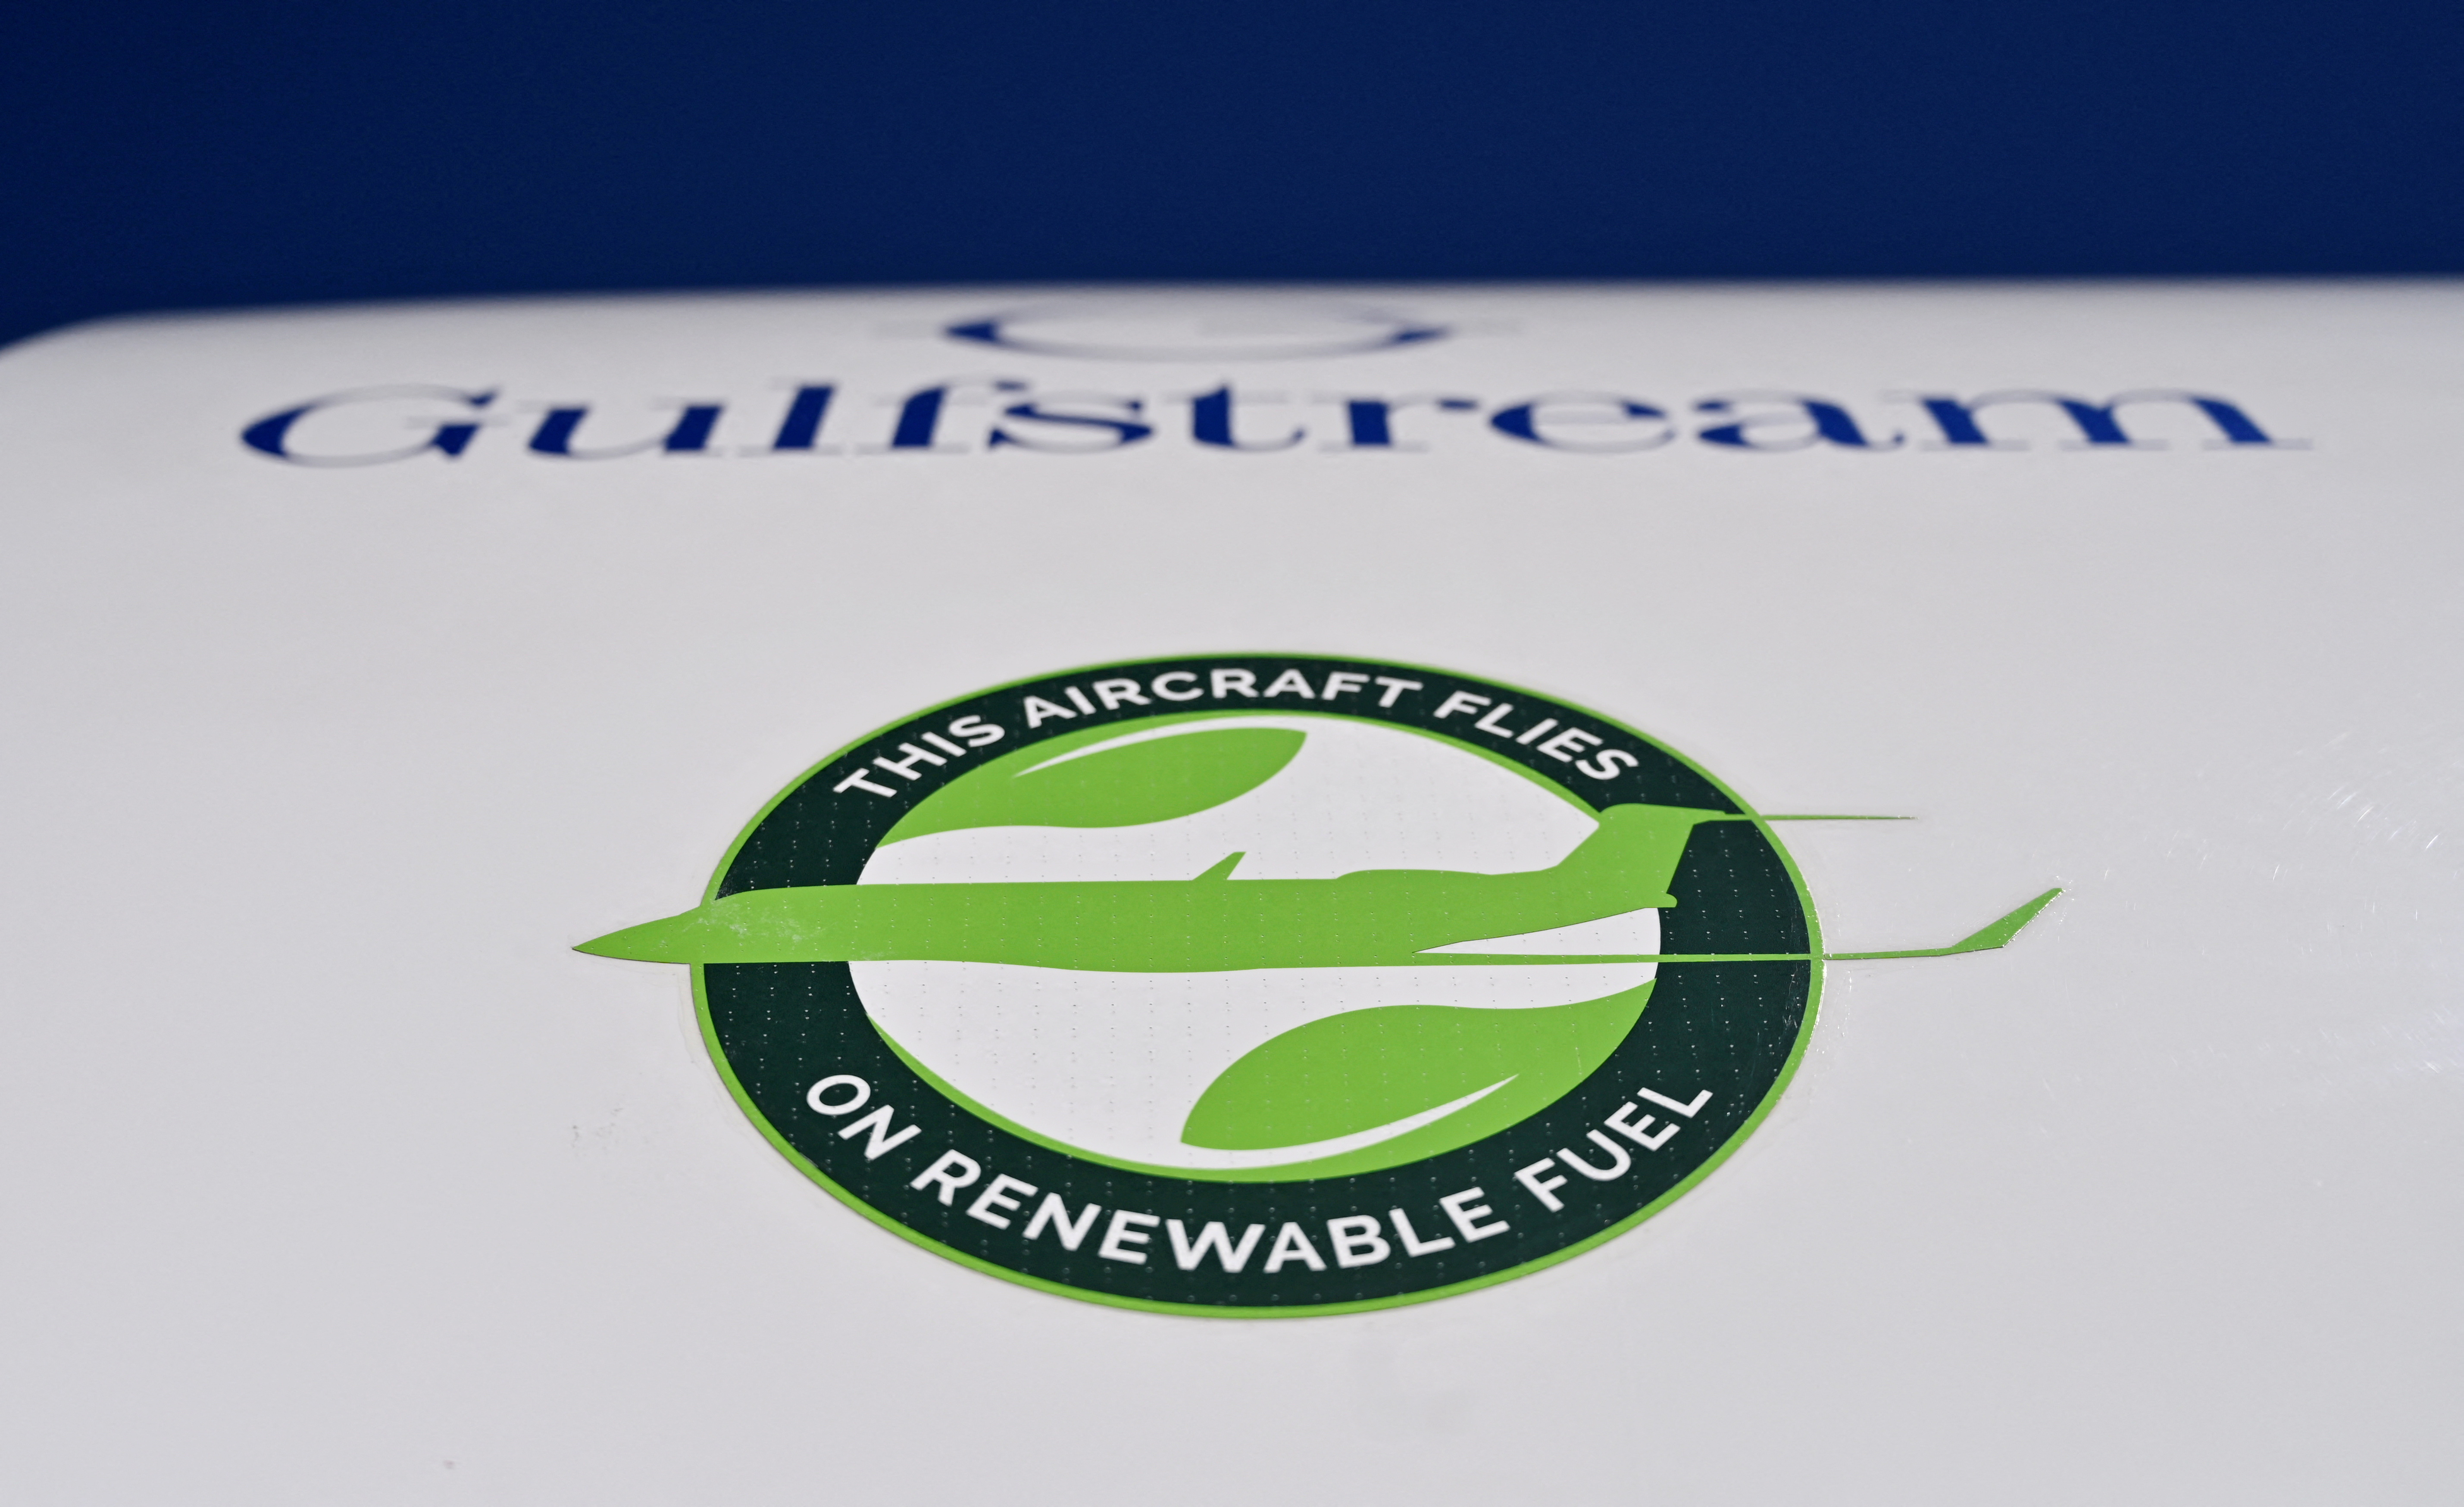 A sticker reading "This plane flies on renewable fuel" is seen on a Gulfstream 650ER business jet at the National Business Aviation Association (NBAA) exhibit in Las Vegas